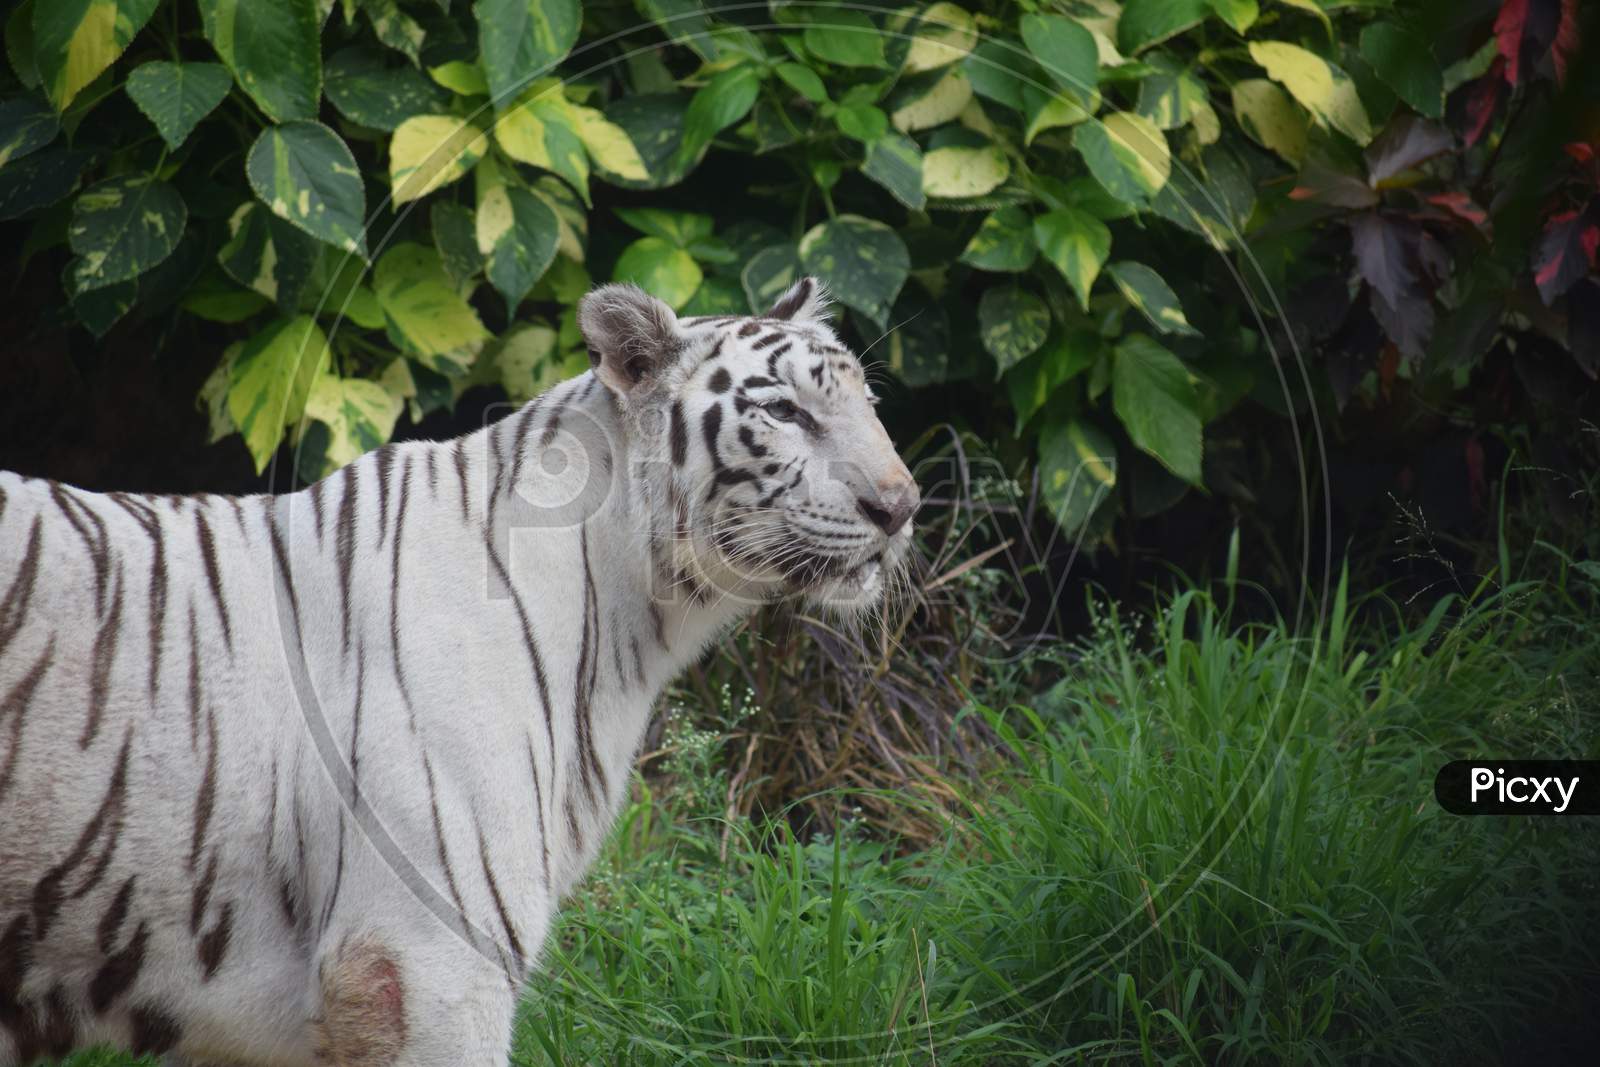 White Tiger In a Zoo